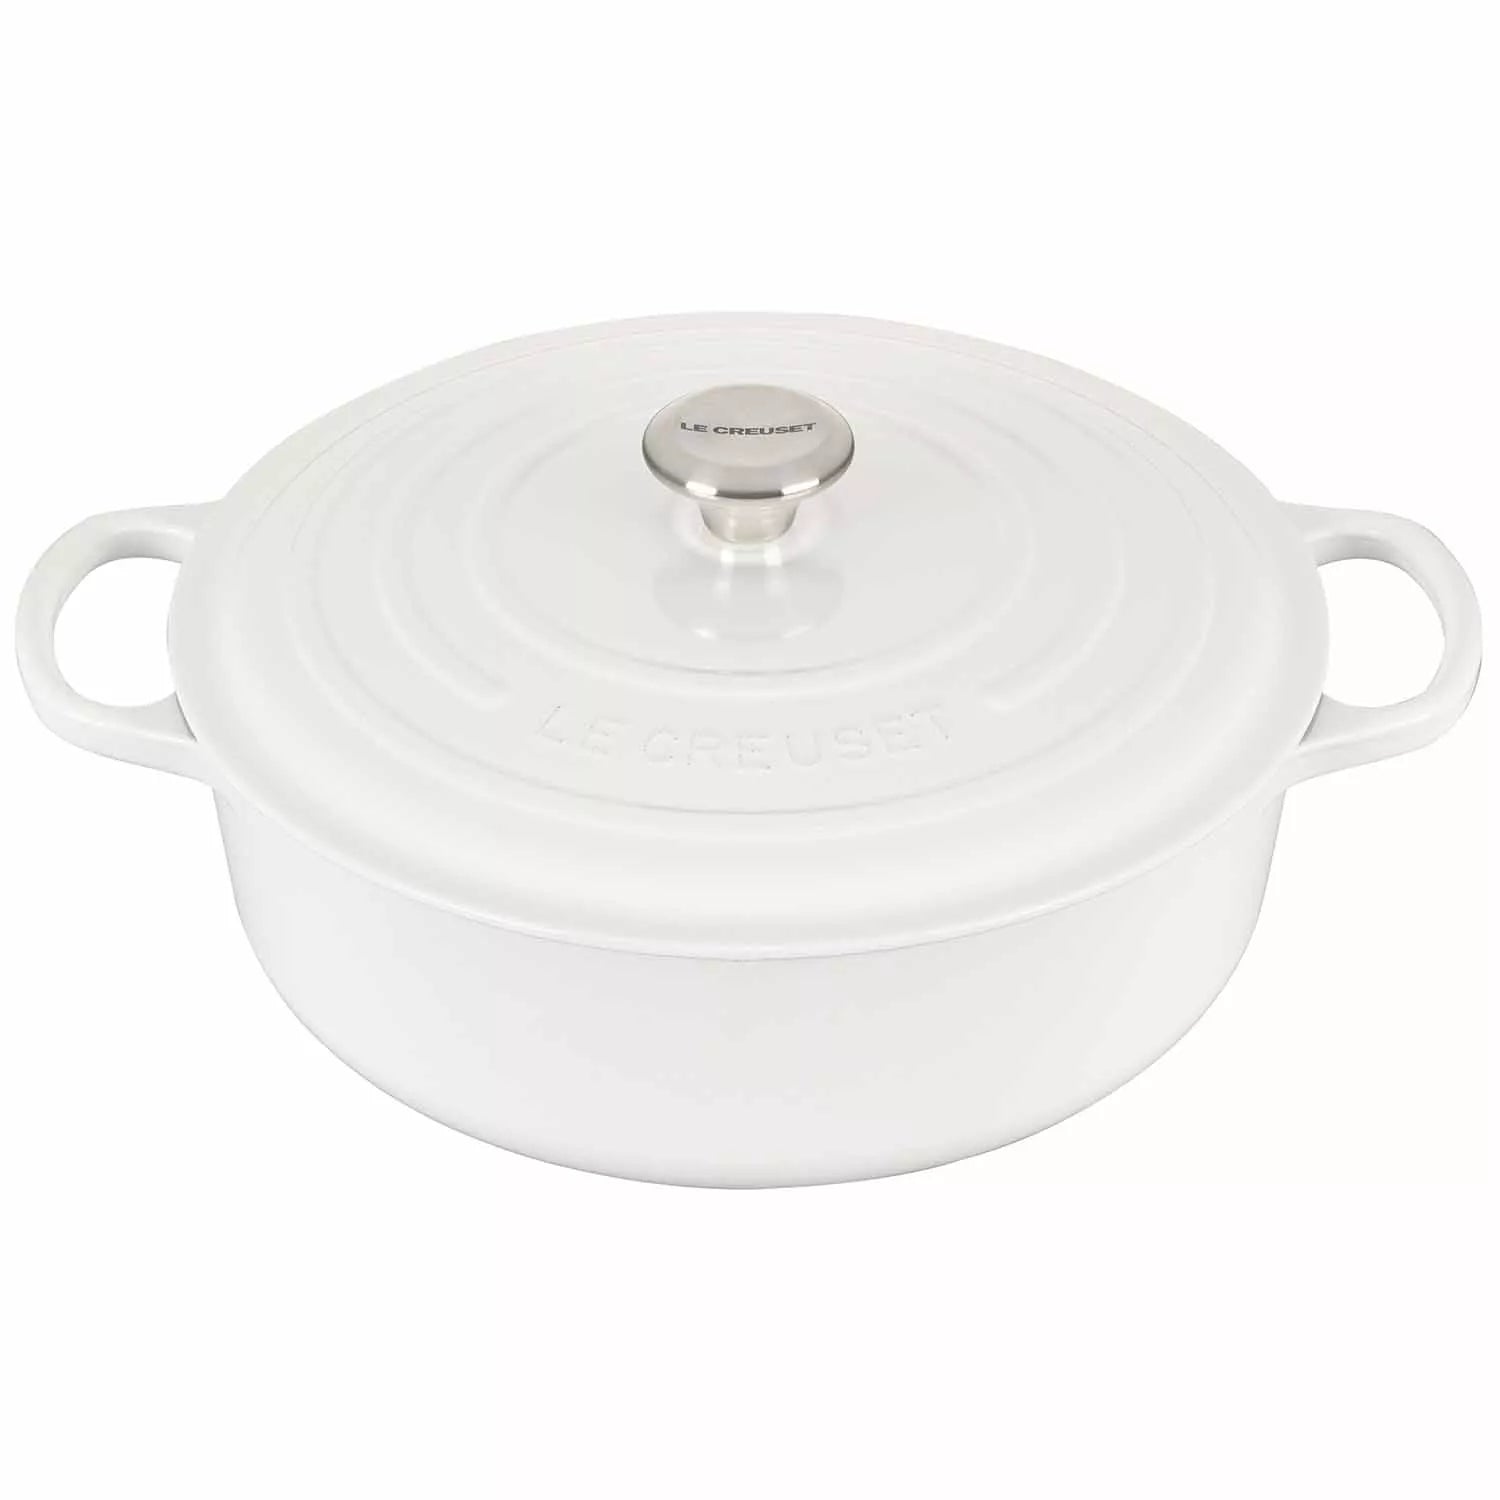 Le Creuset Wide Round Oven – SPECIAL – 6.5 QT – White